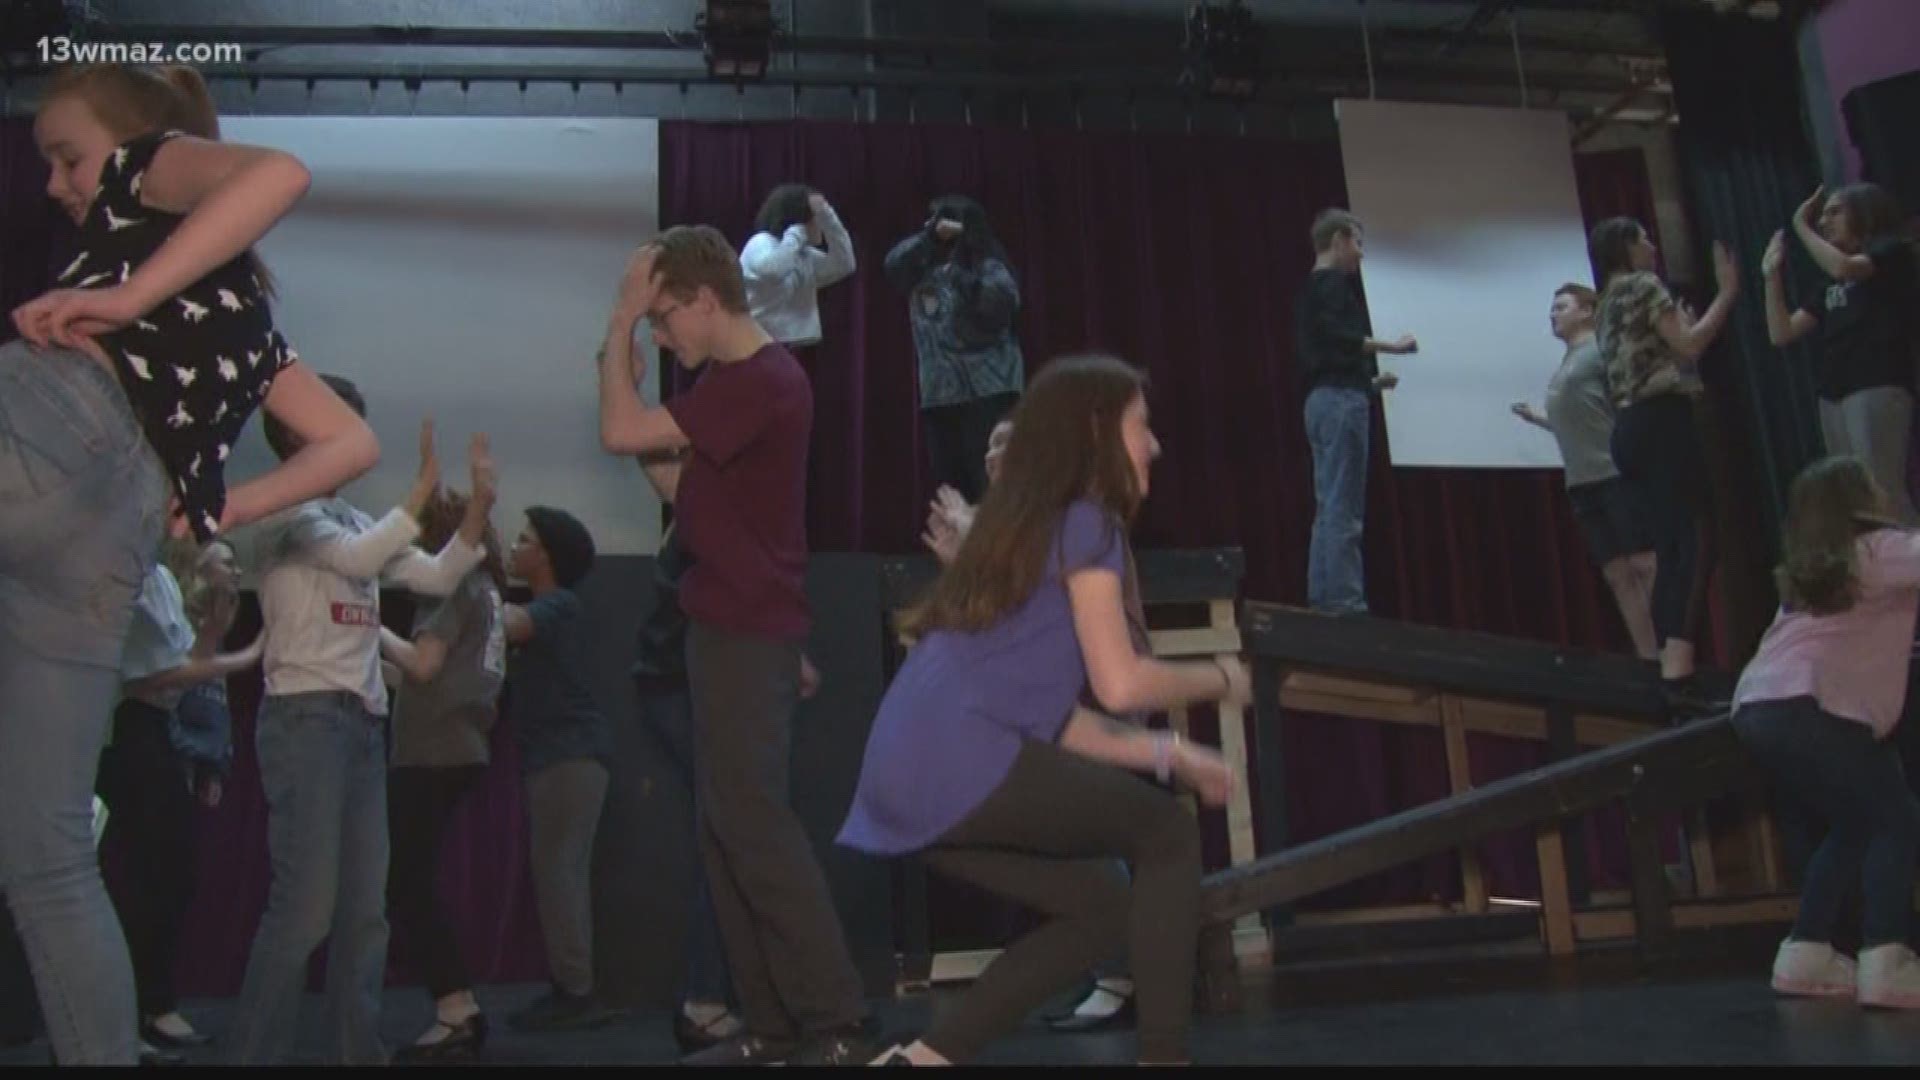 Theatre Macon has a rich history of performing big Broadway musicals, but over the last 30 years, they've also given kids a place to fall in love with theatre.